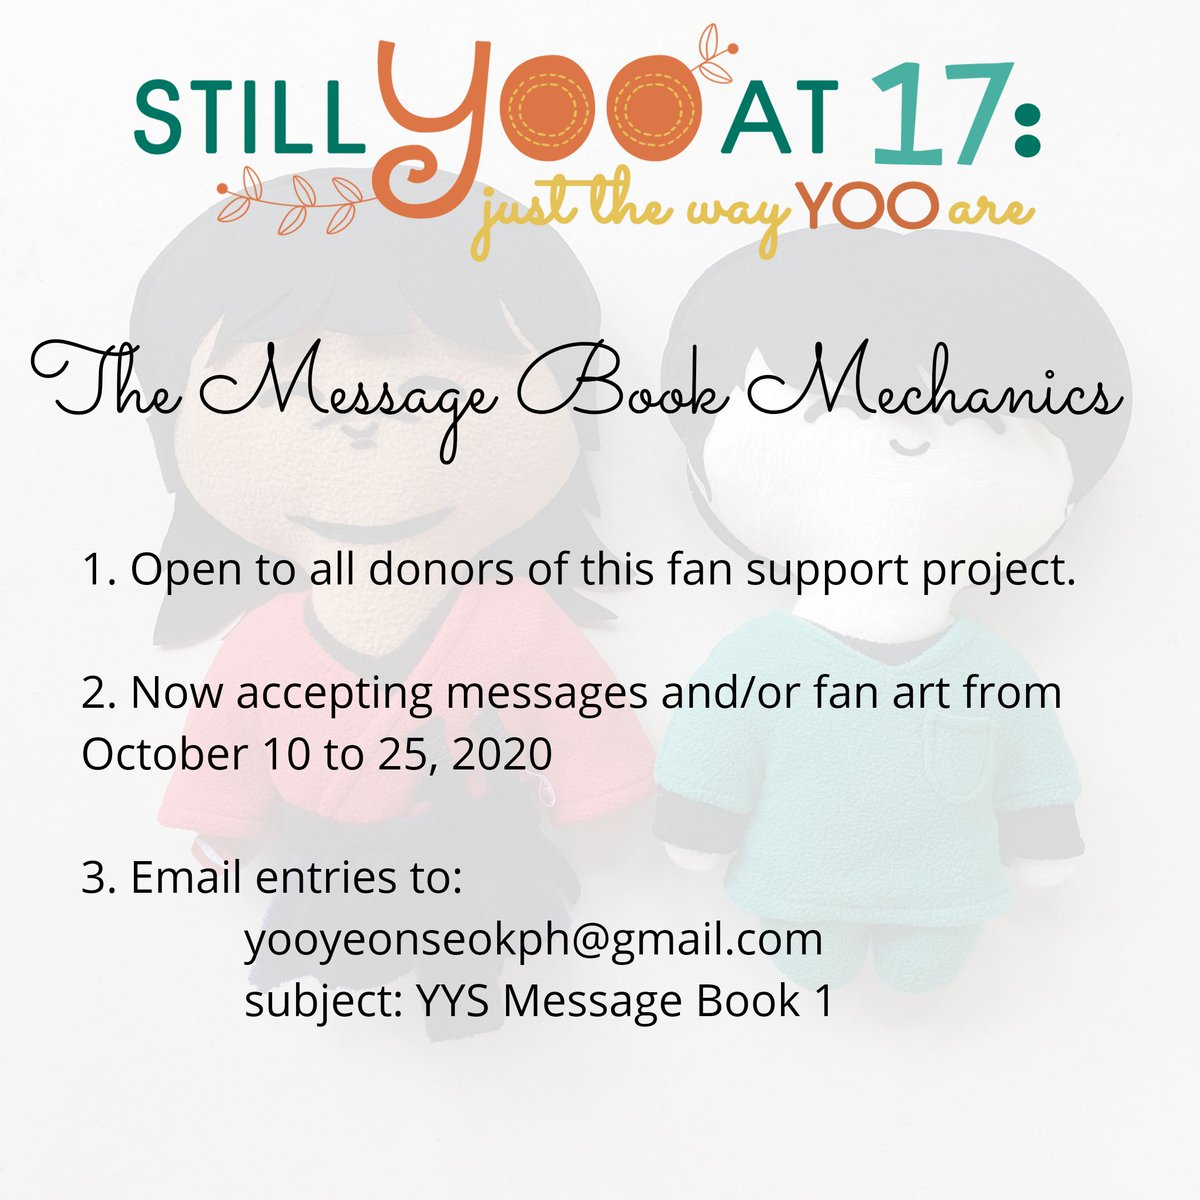 Submission of entries for the message book to go with our gifts is now OPEN. Please do read the mechanics below. Contributions, no matter how big or small, are still welcome! Please see our PINNED POST for more details.  #YooYeonSeok  #StillYOOAt17